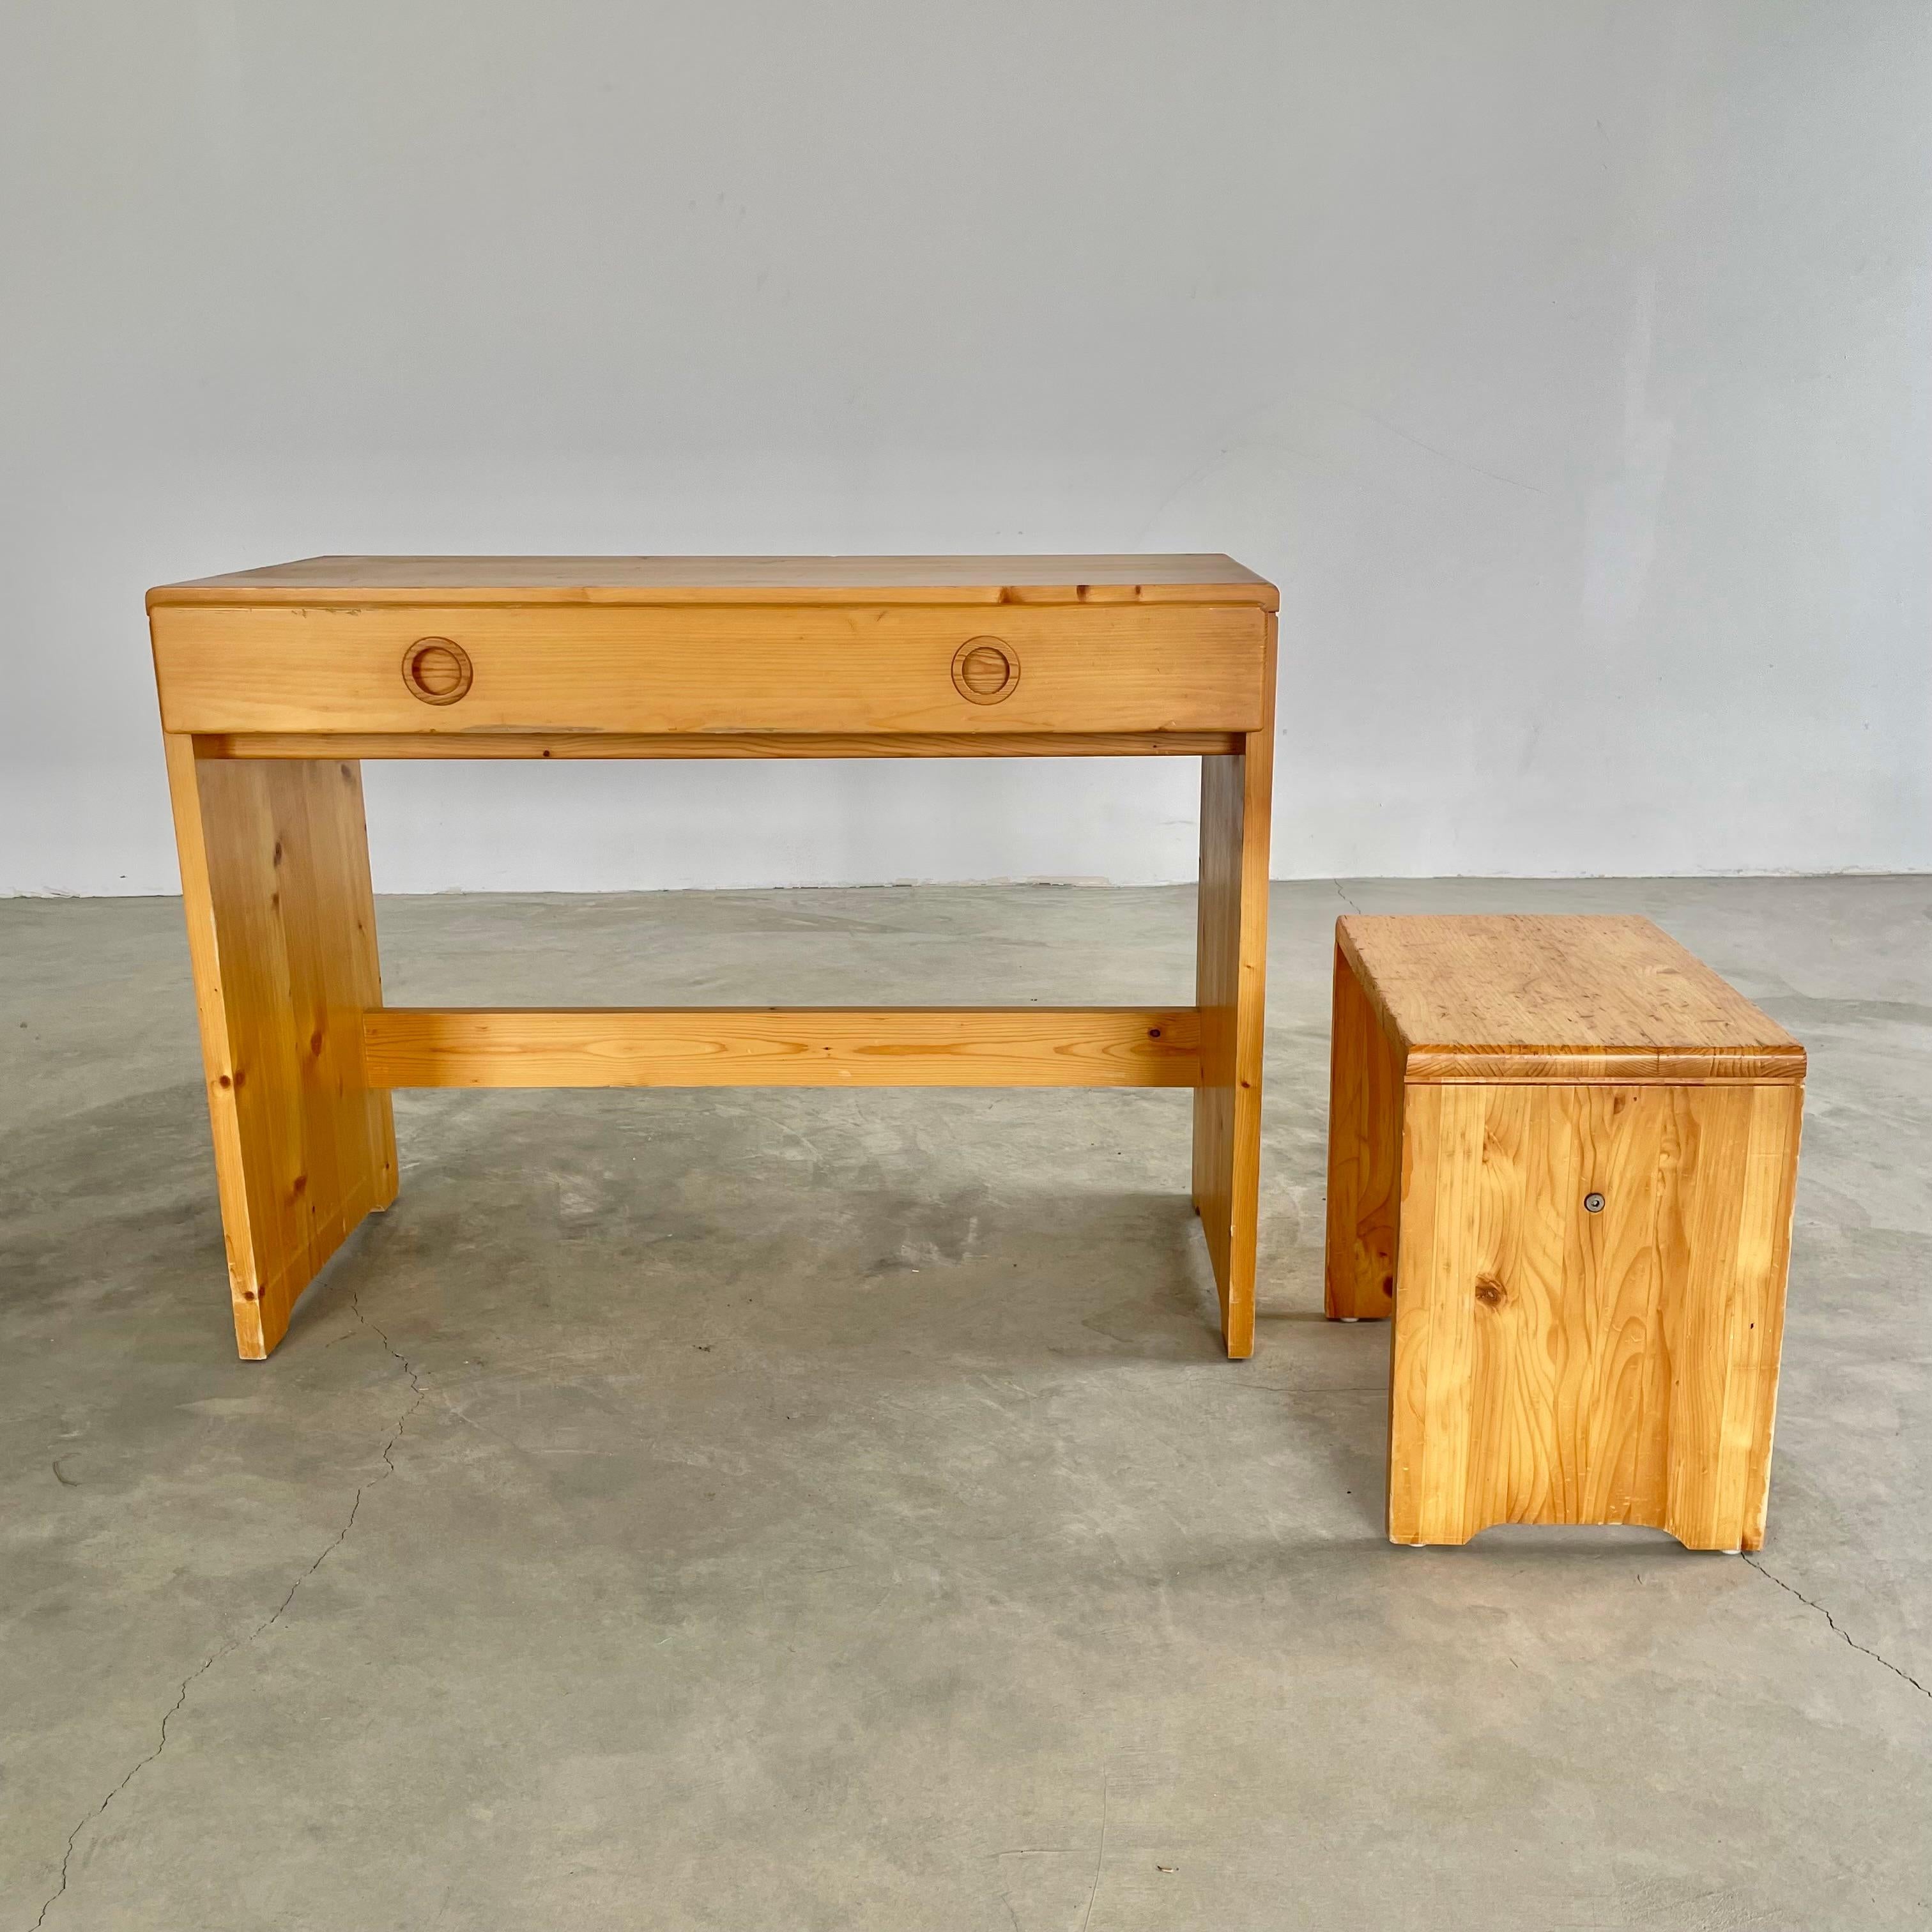 Rare Charlotte Perriand desk for Les Arcs. circa 1960s. Comes with matching stool. This gorgeous solid pine desk can be used as a console or writing desk. Beautiful vintage condition and wear. One single extra long drawer runs along the front of the